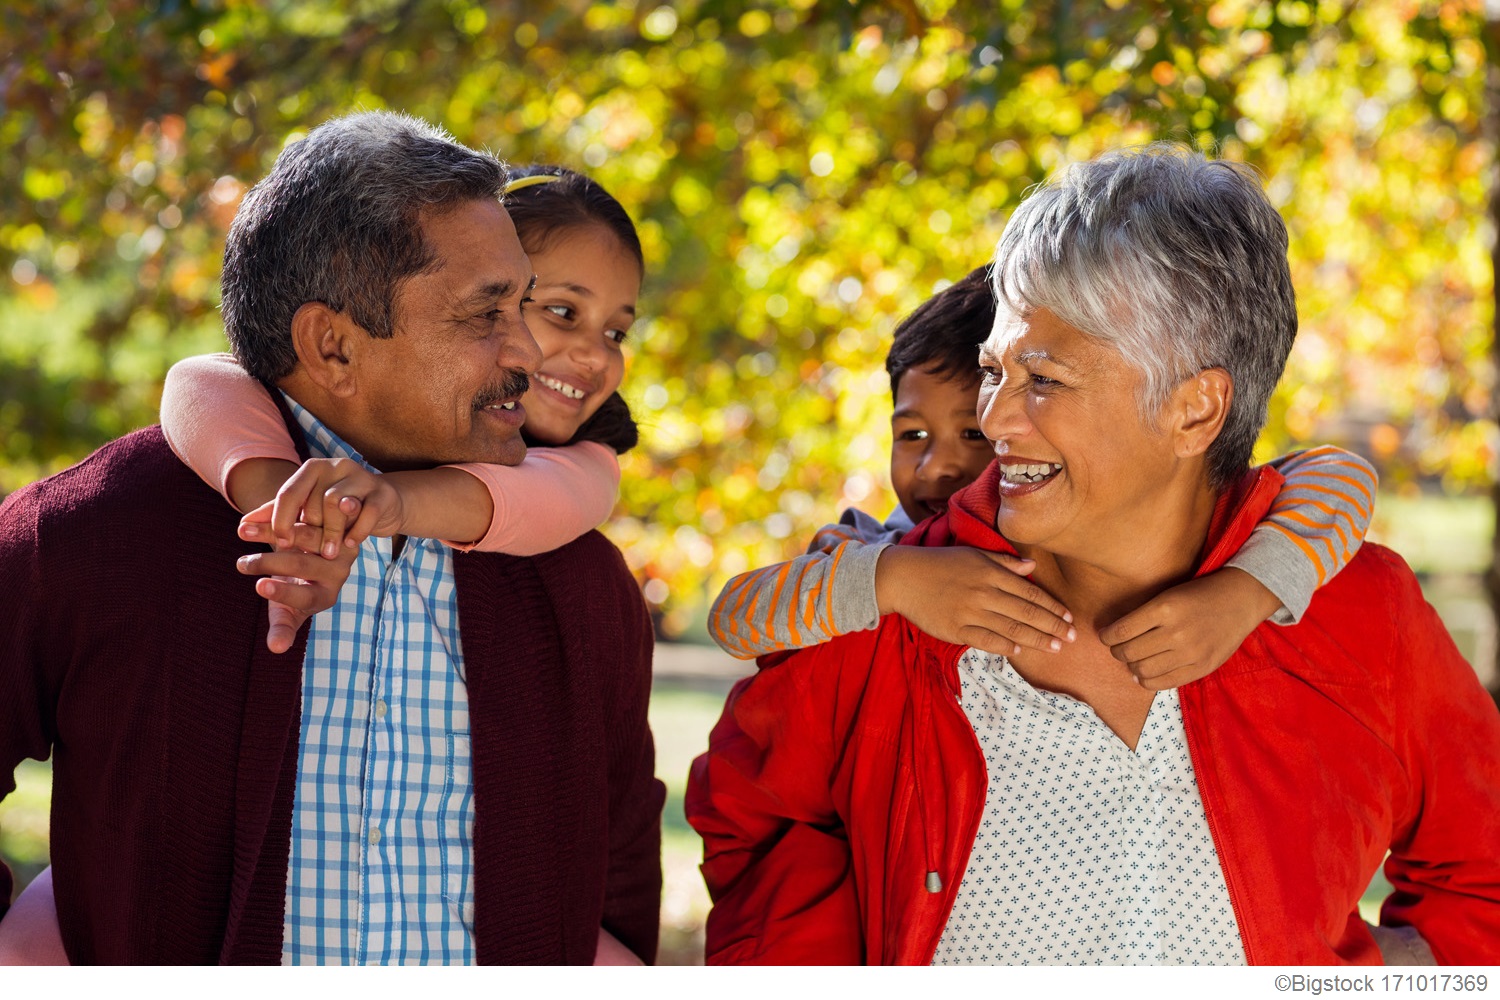 What To Get Grandparents For Grandparents Day